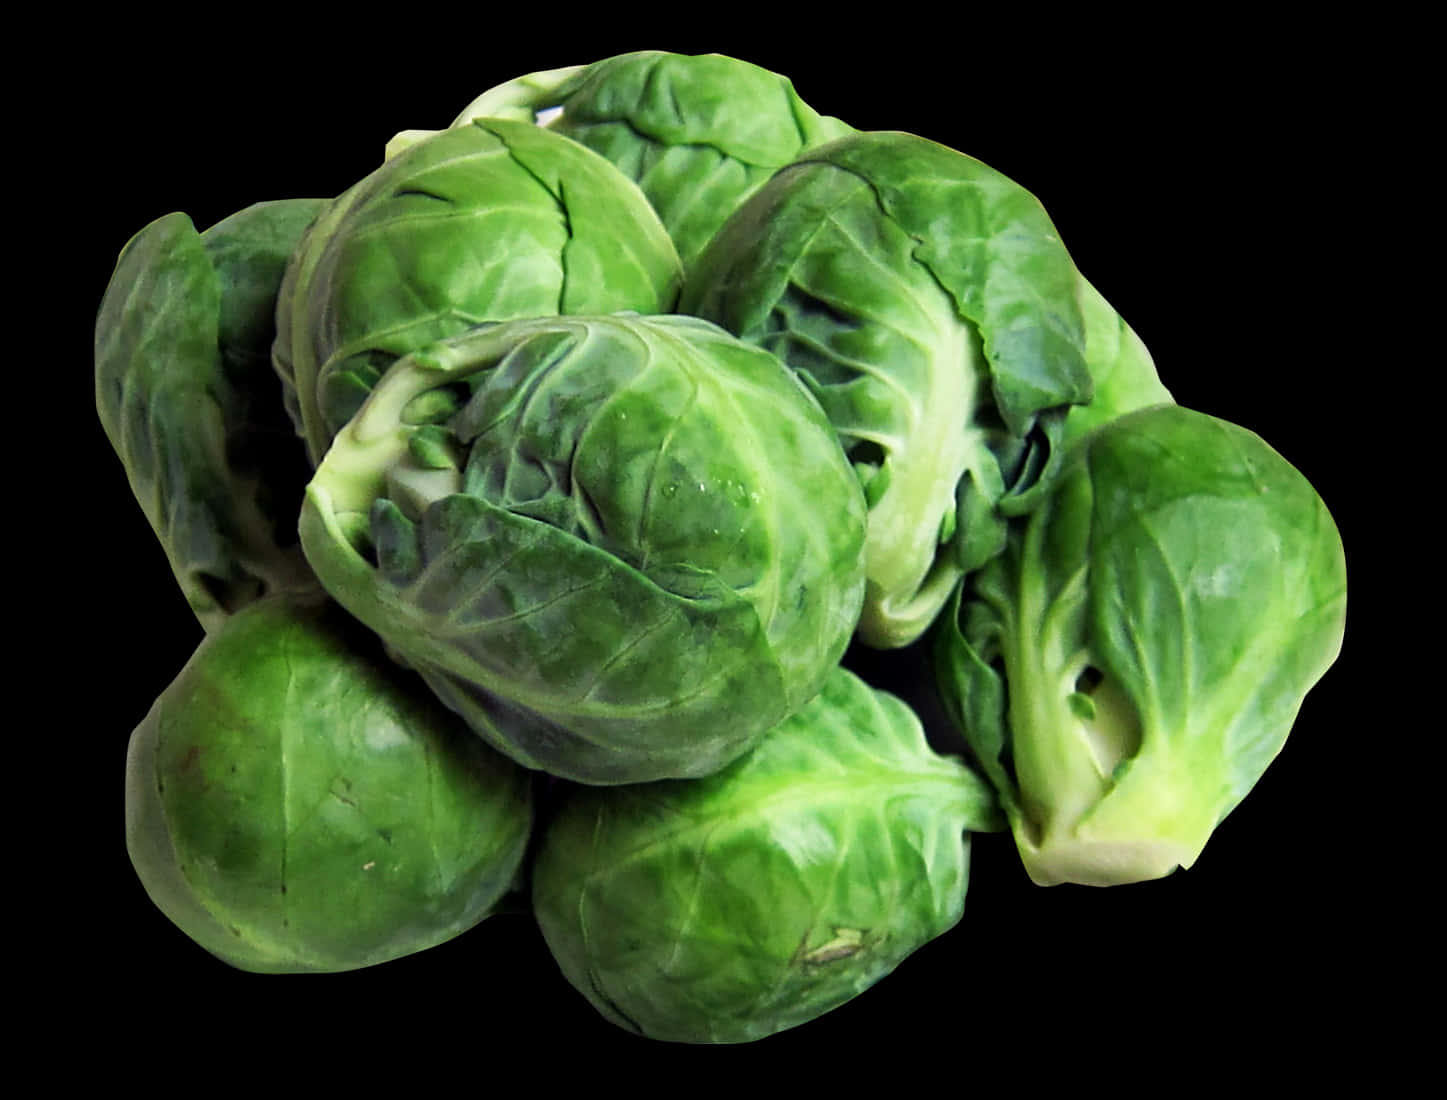 Brussels Sprouts On A Black Background